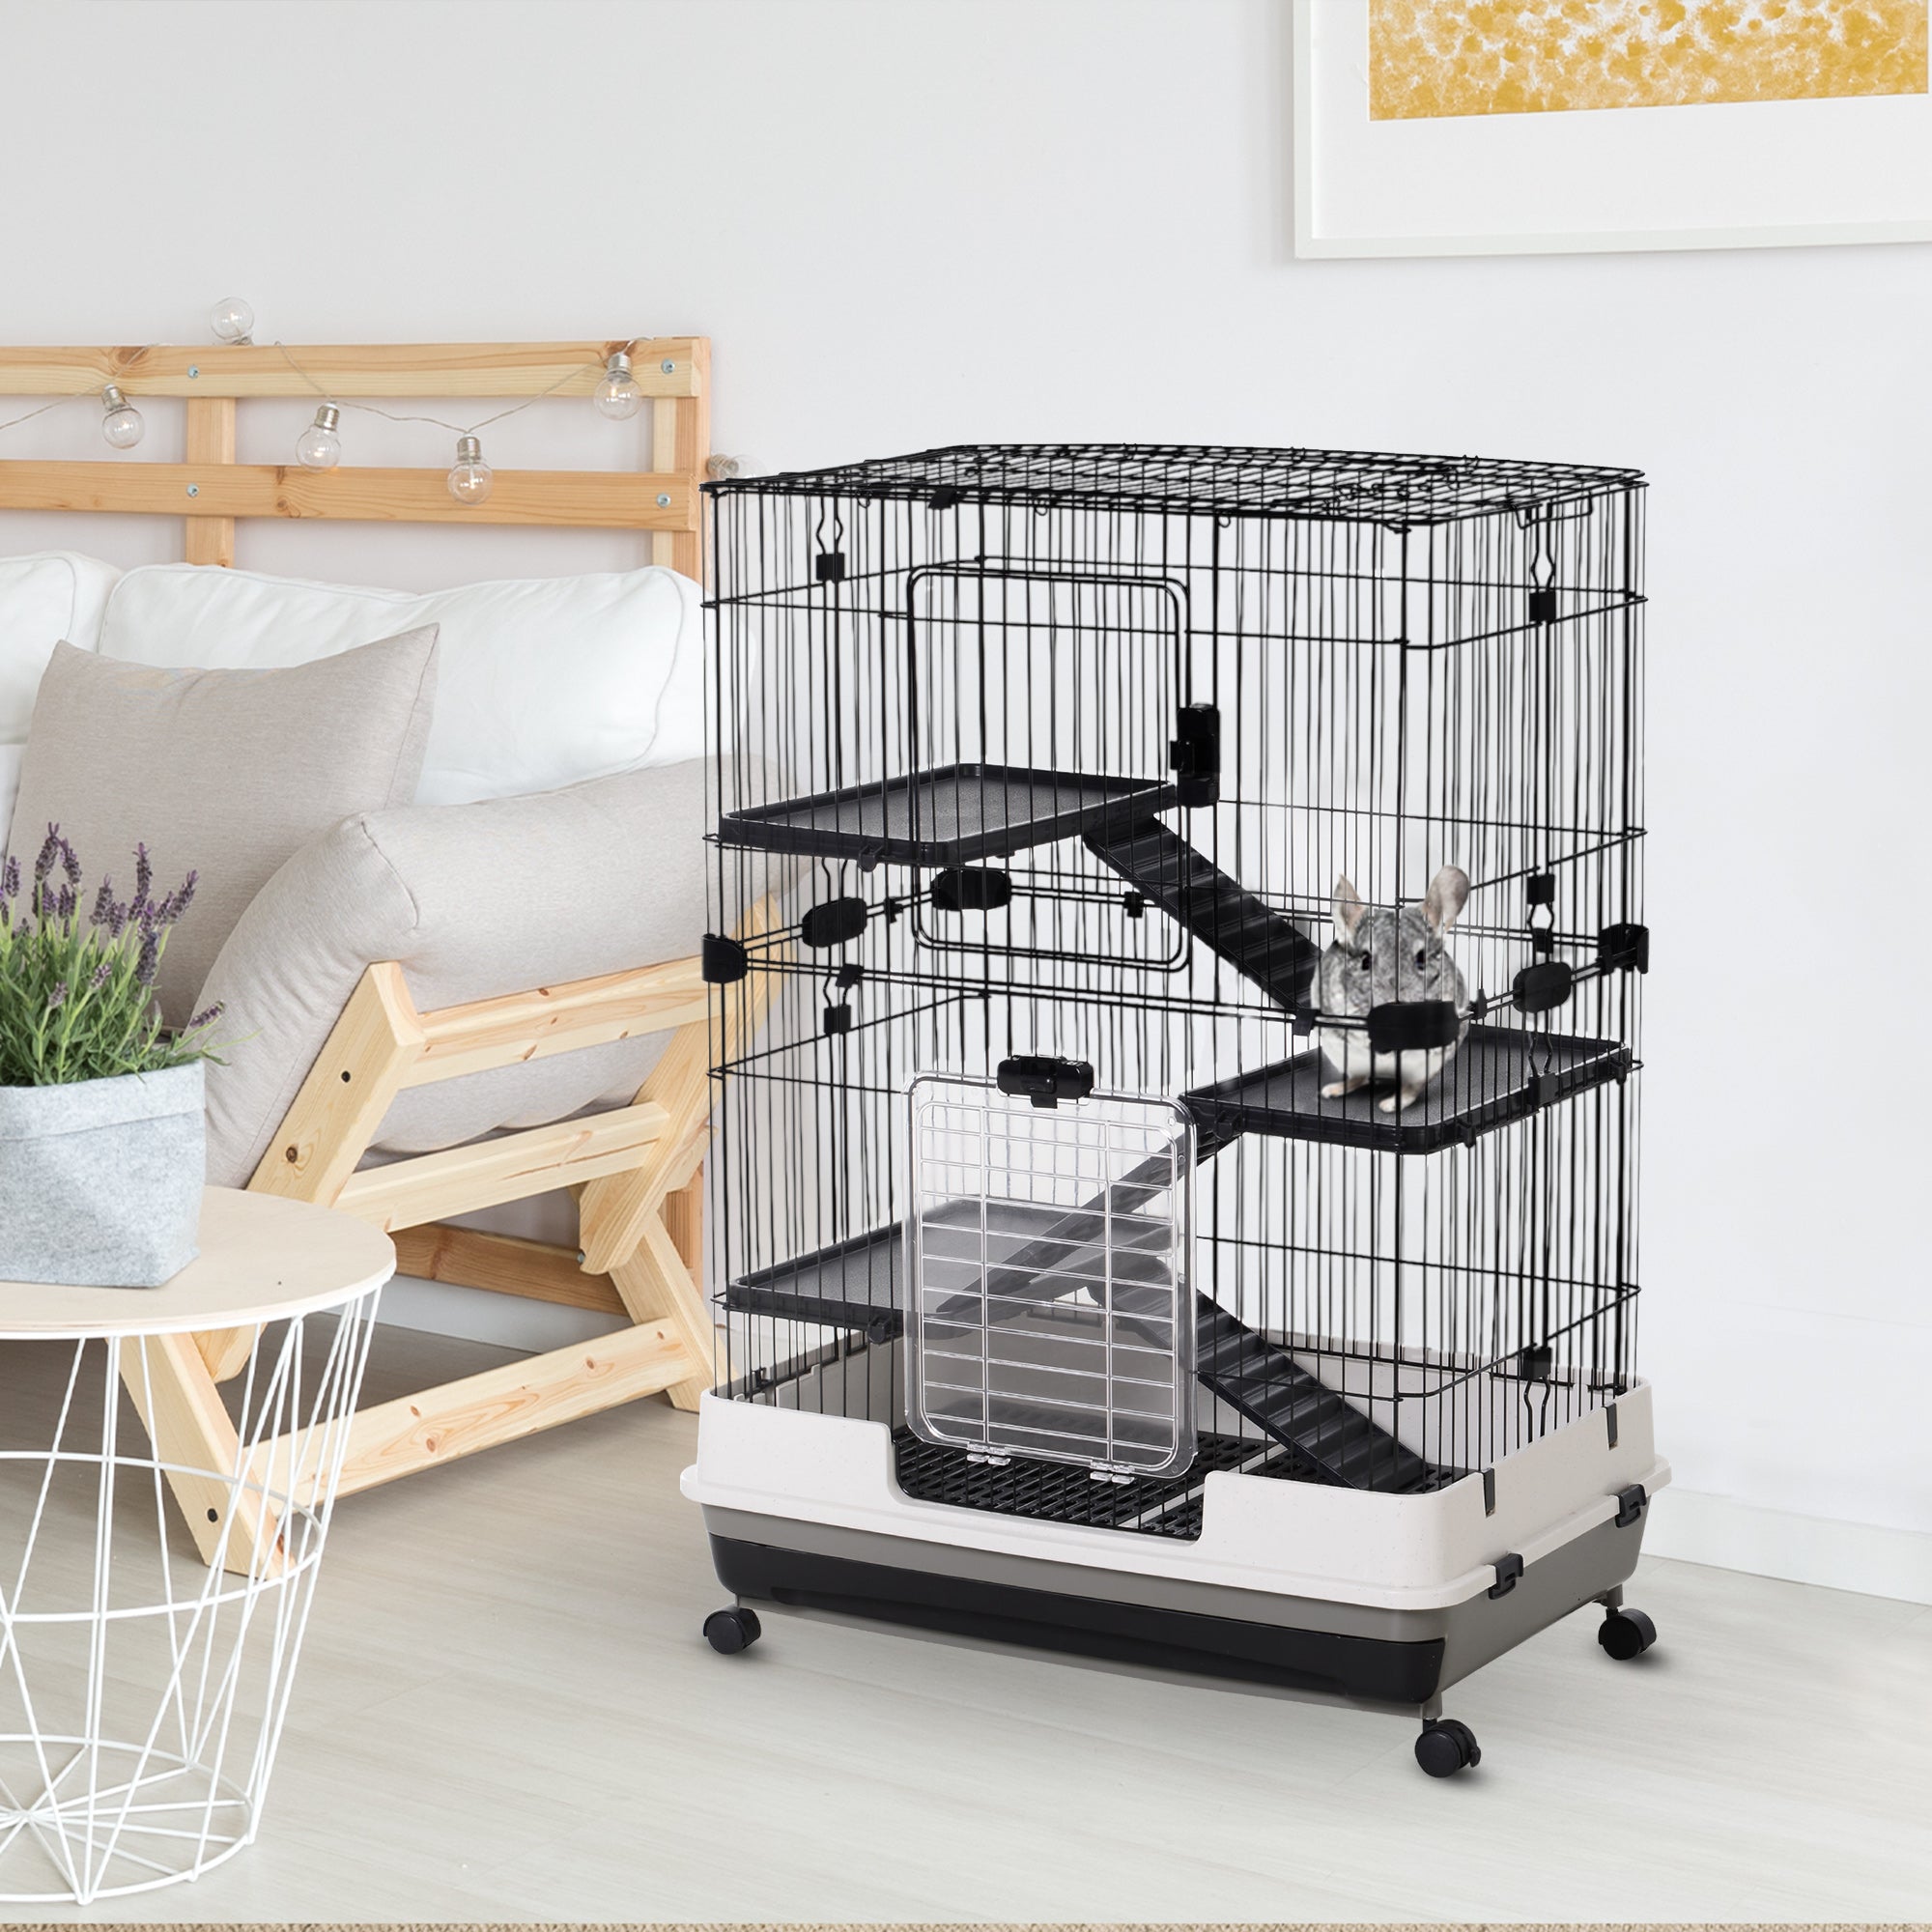 Four-Tier Cage, for Ferrets, Chinchillas with Wheels, PawHut, Black